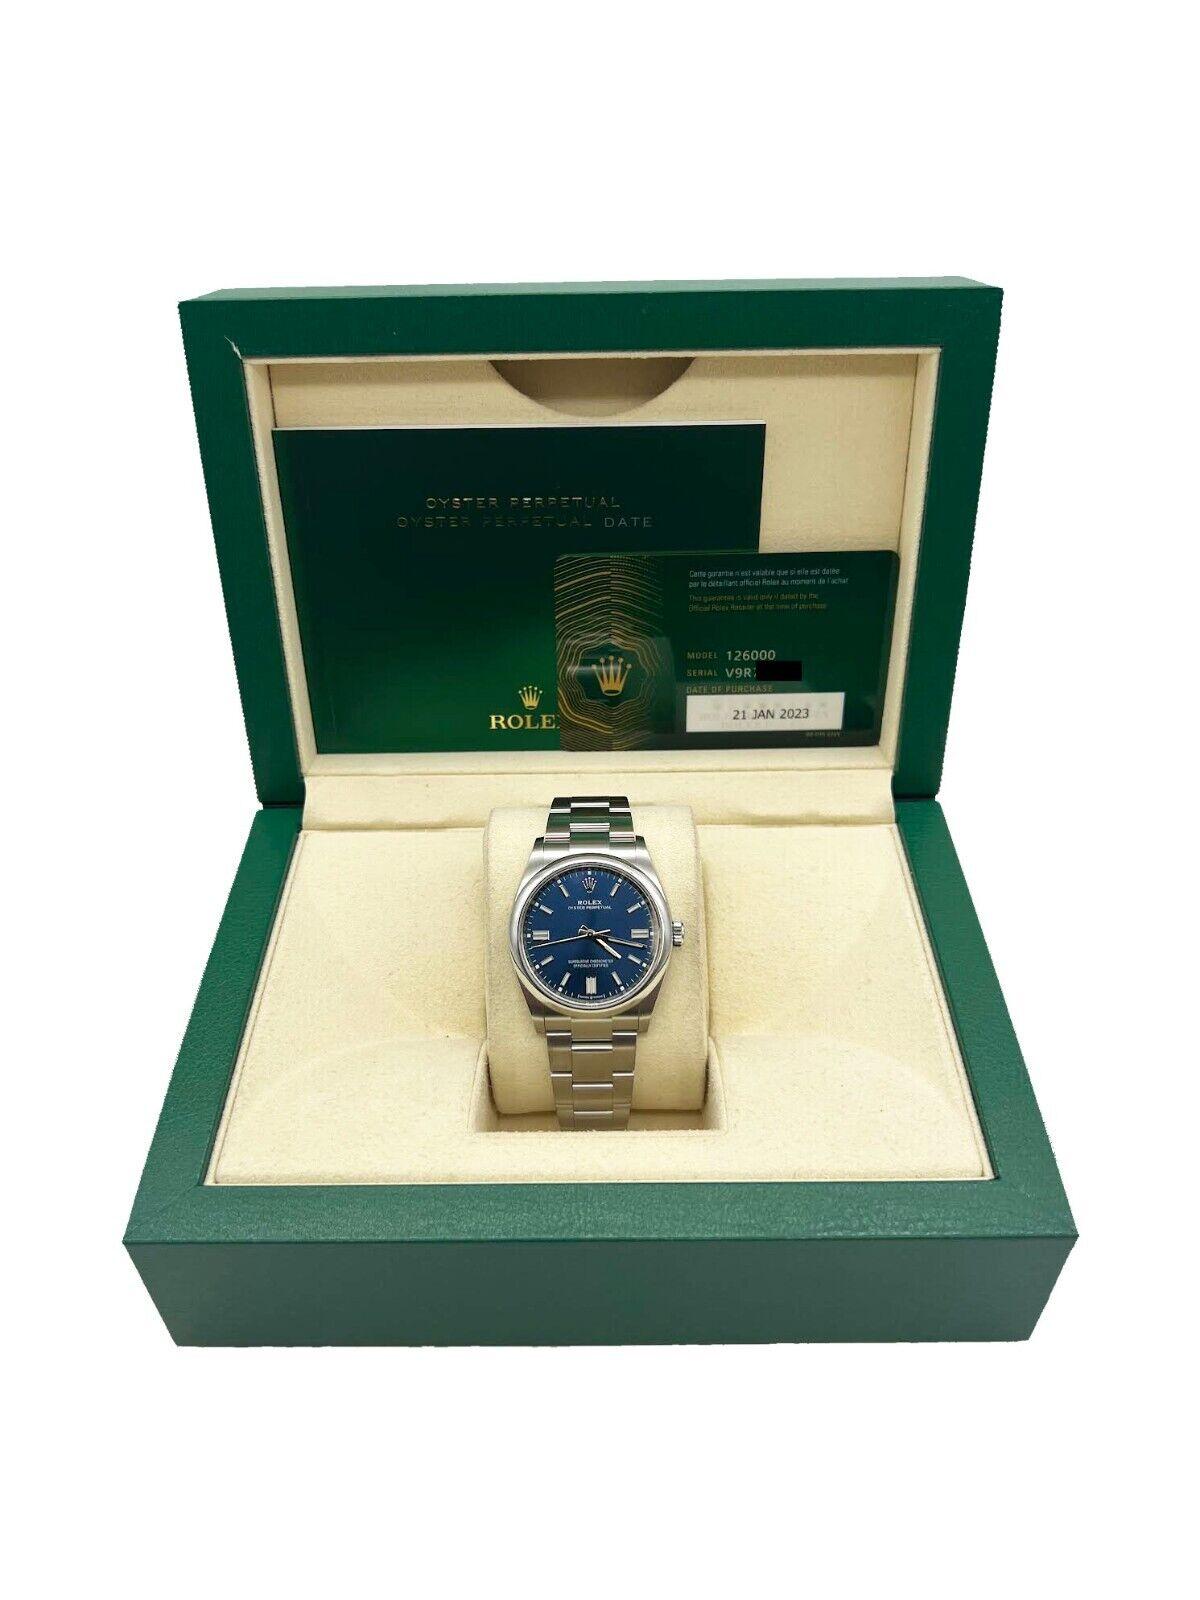 Style Number: 126000

Serial: V9R70***

Year: 2023

Model: Oyster Perpetual 

Case Material: Stainless Steel 

Band: Stainless Steel 

Bezel: Stainless Steel  Smooth Bezel 

Dial: Blue 

Face: Sapphire Crystal 

Case Size: 36mm

Includes: 

-Rolex